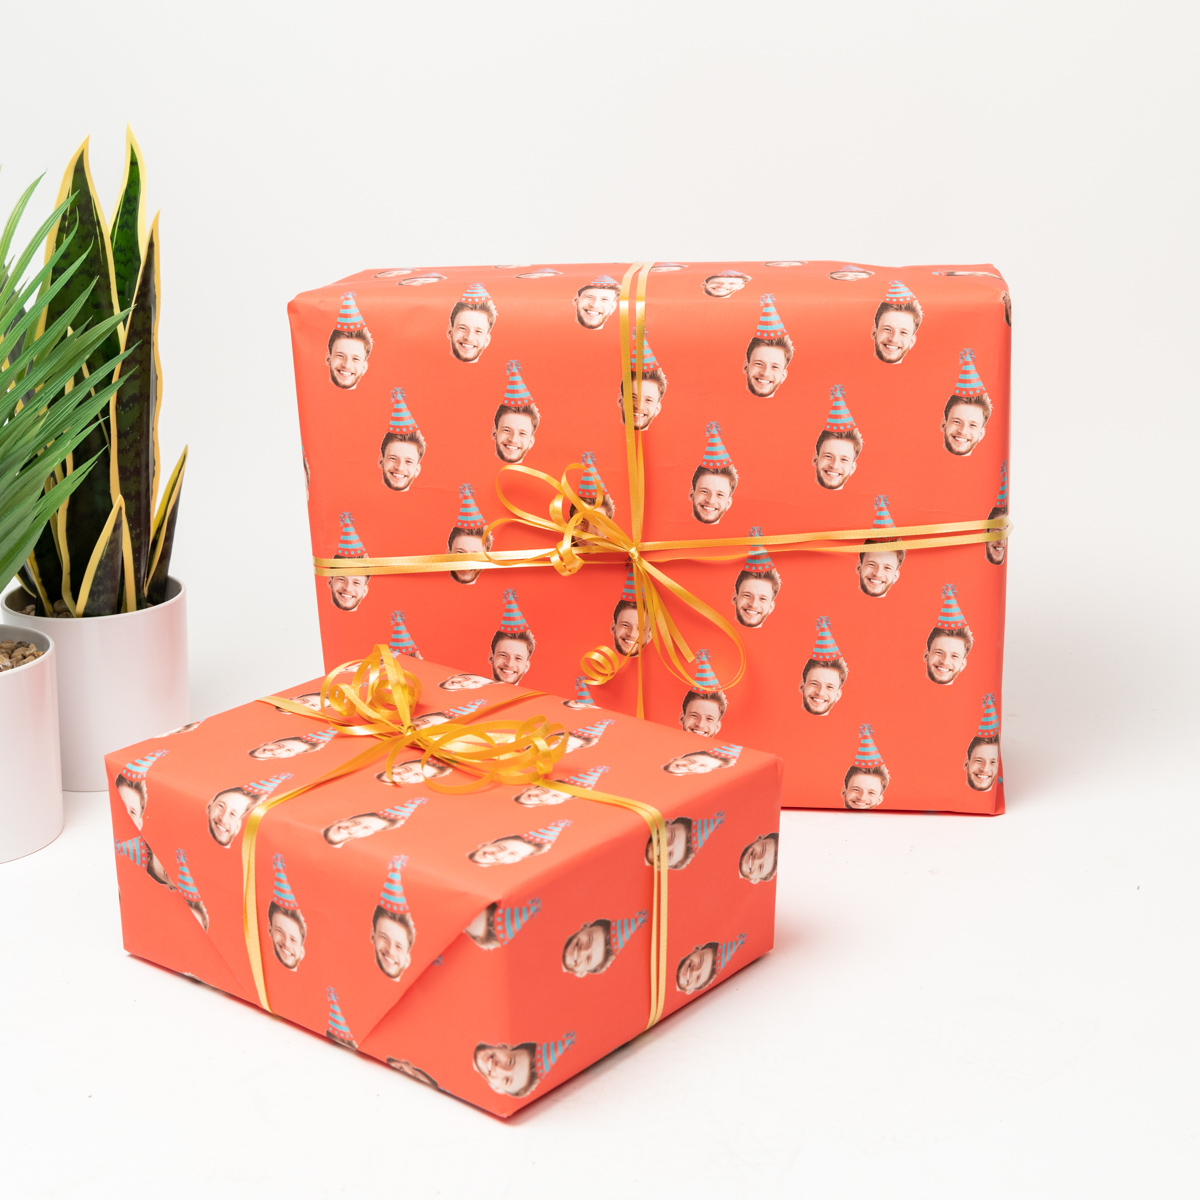 Personalised Wrapping Paper: Face with Party Hat